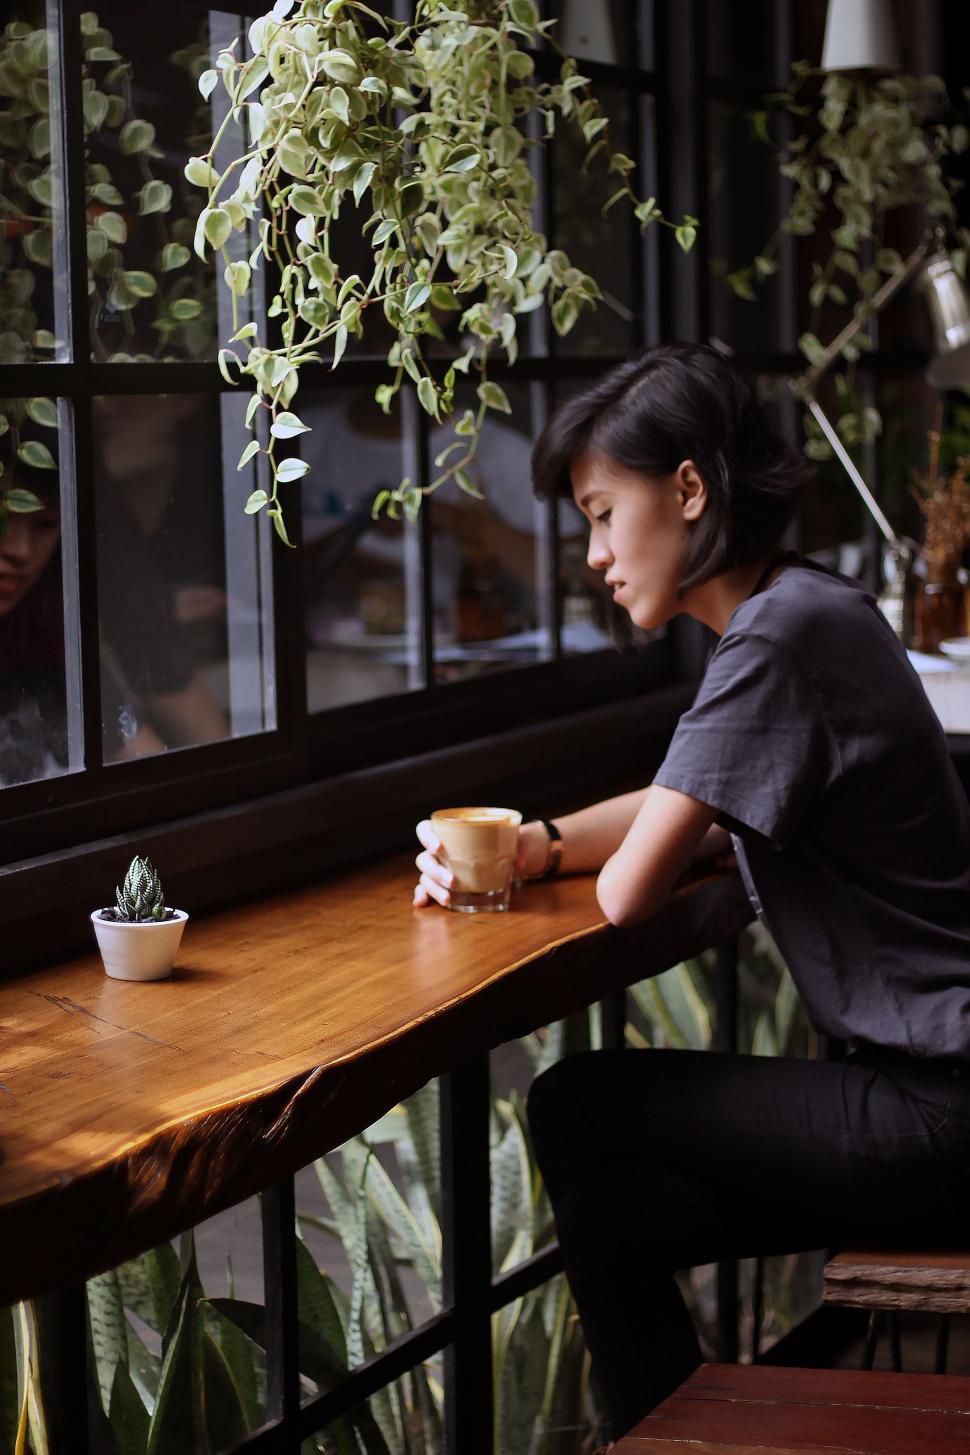 Free Image of Woman Sitting at Table With Coffee Cup 